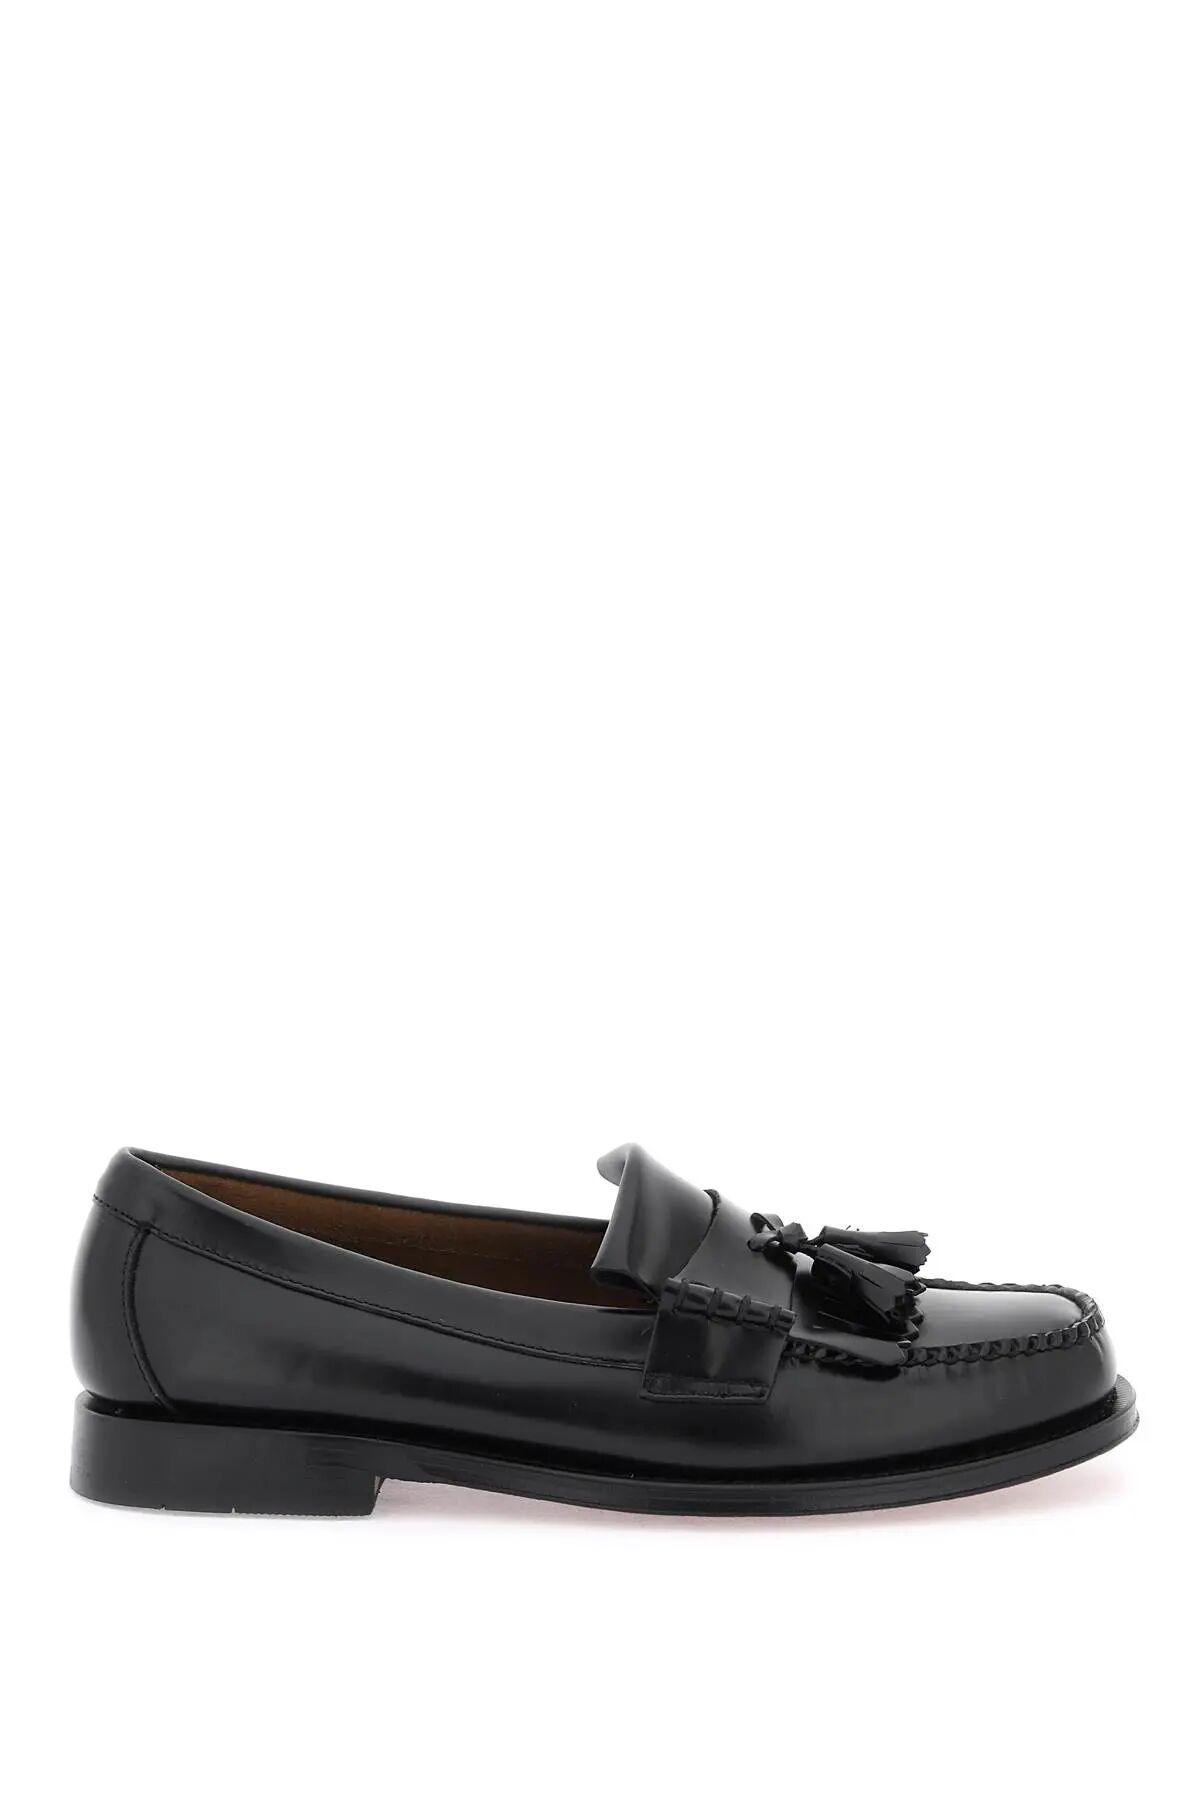 G.H. BASS Esther Kiltie Weejuns loafers  - Black - male - Size: 41